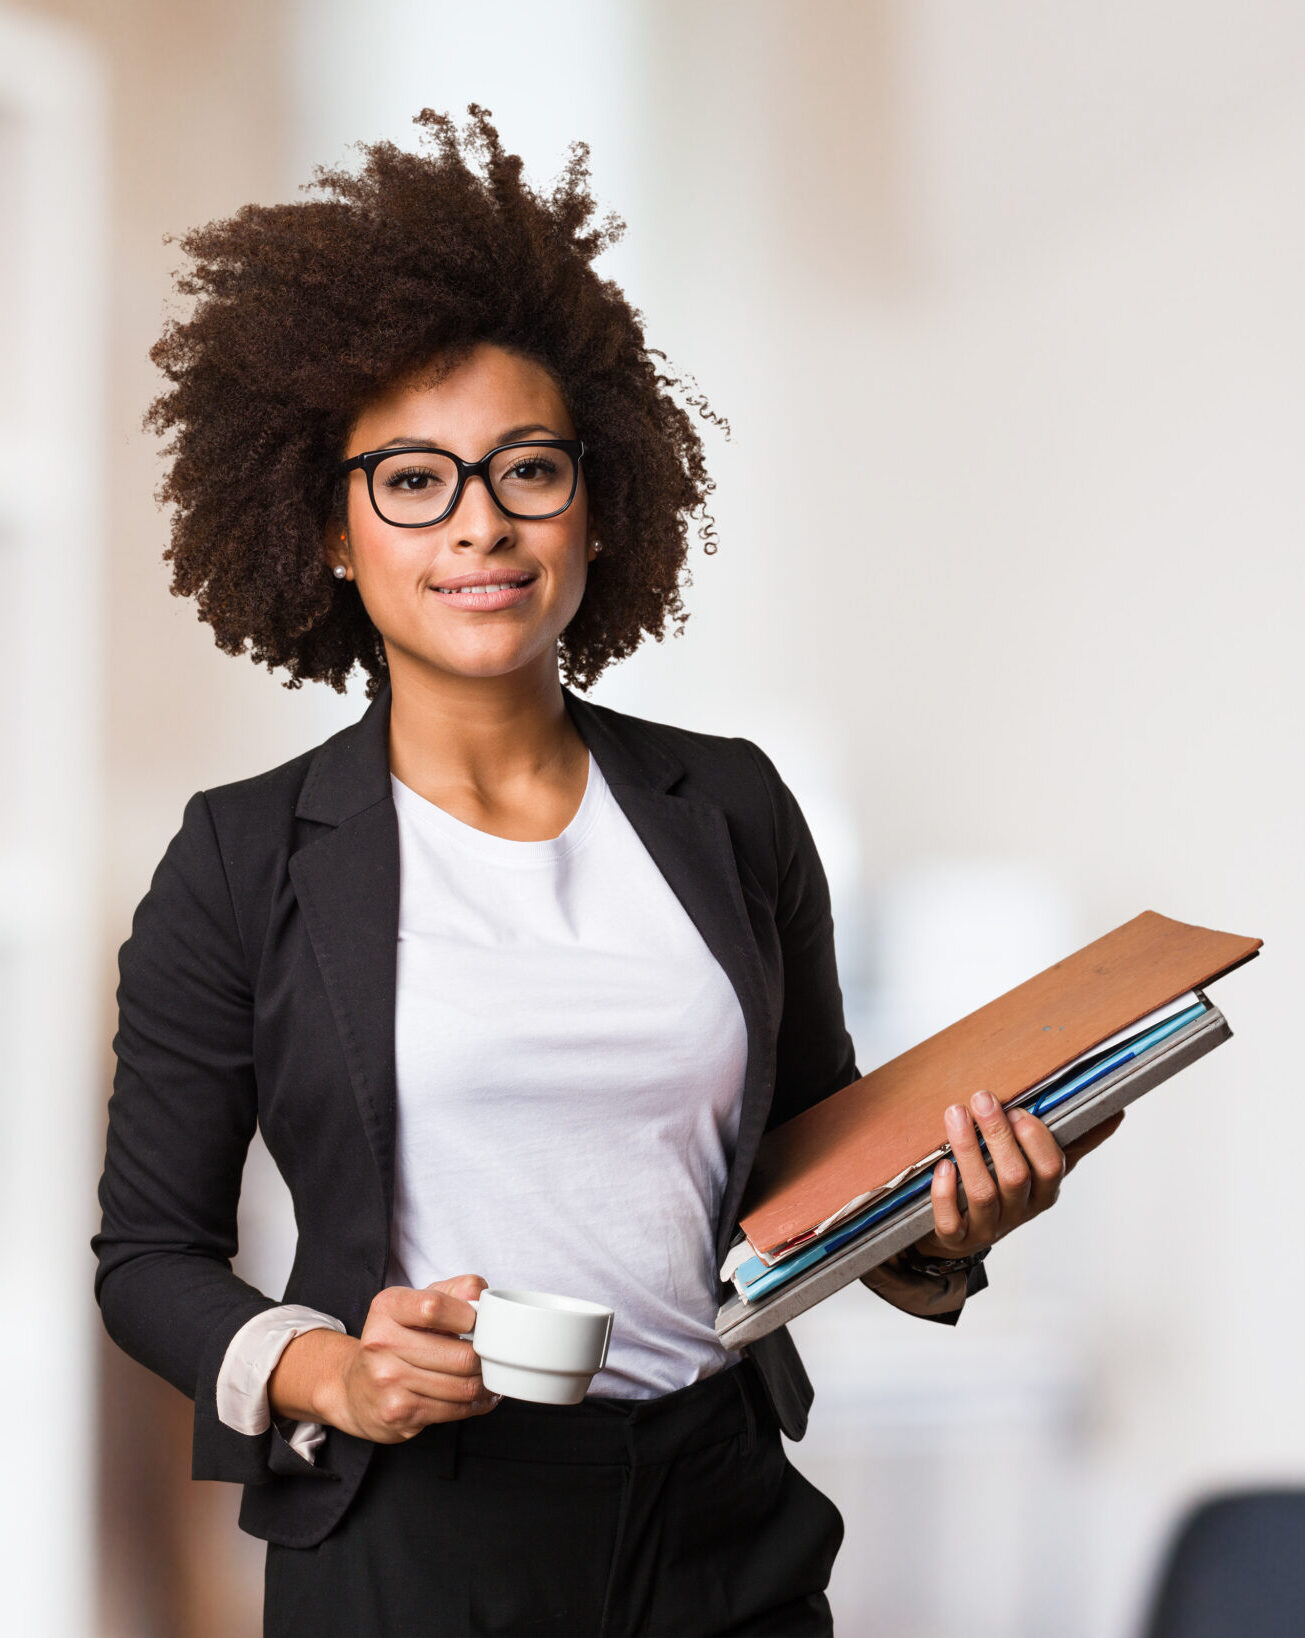 professional black woman holds files and coffee cup in an office setting